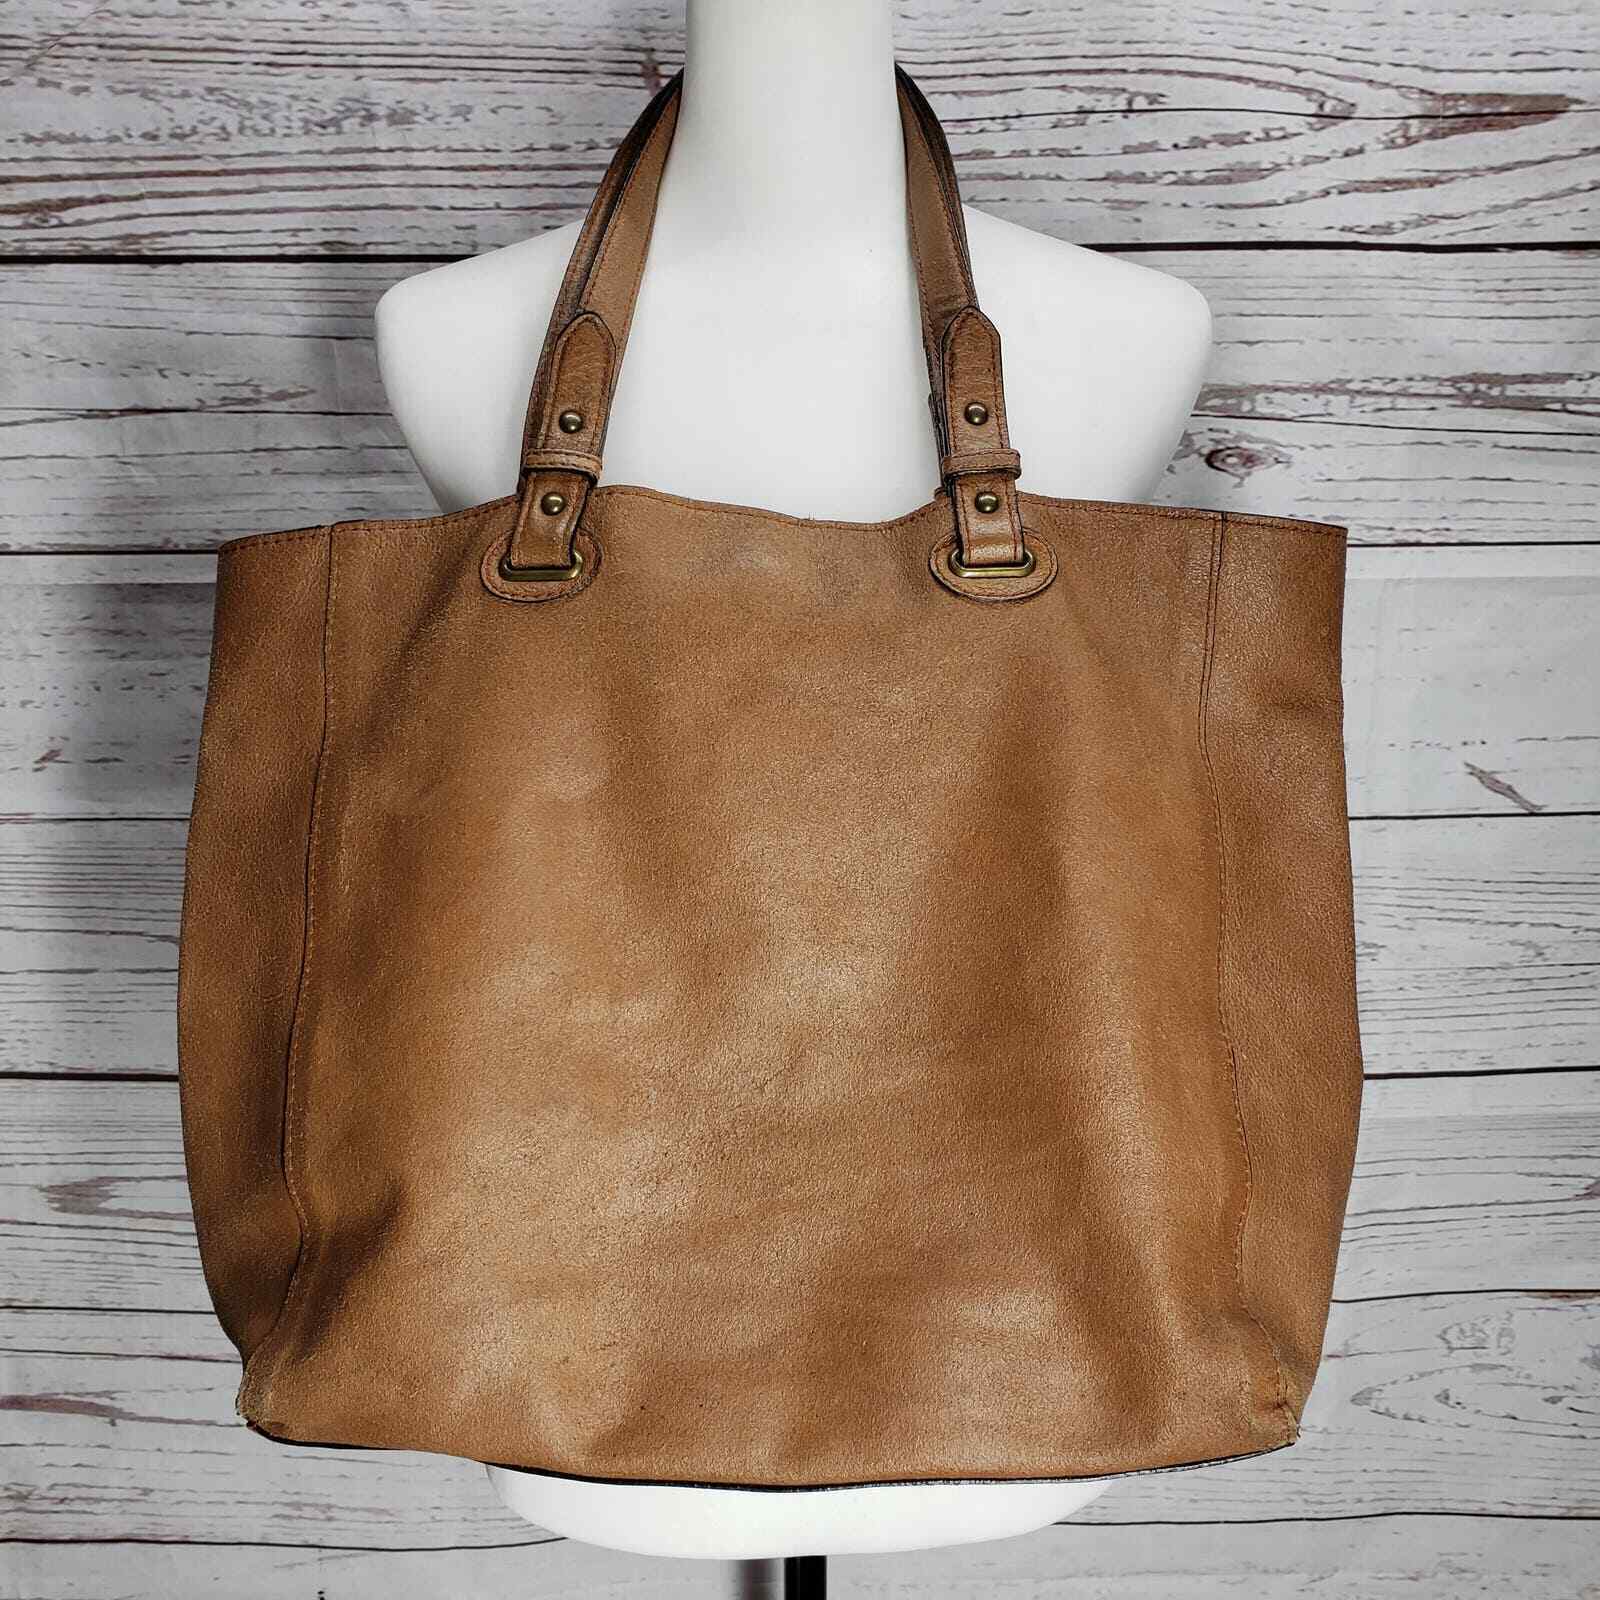 Willsons Leather Womens Brown Tote Bag - image 2